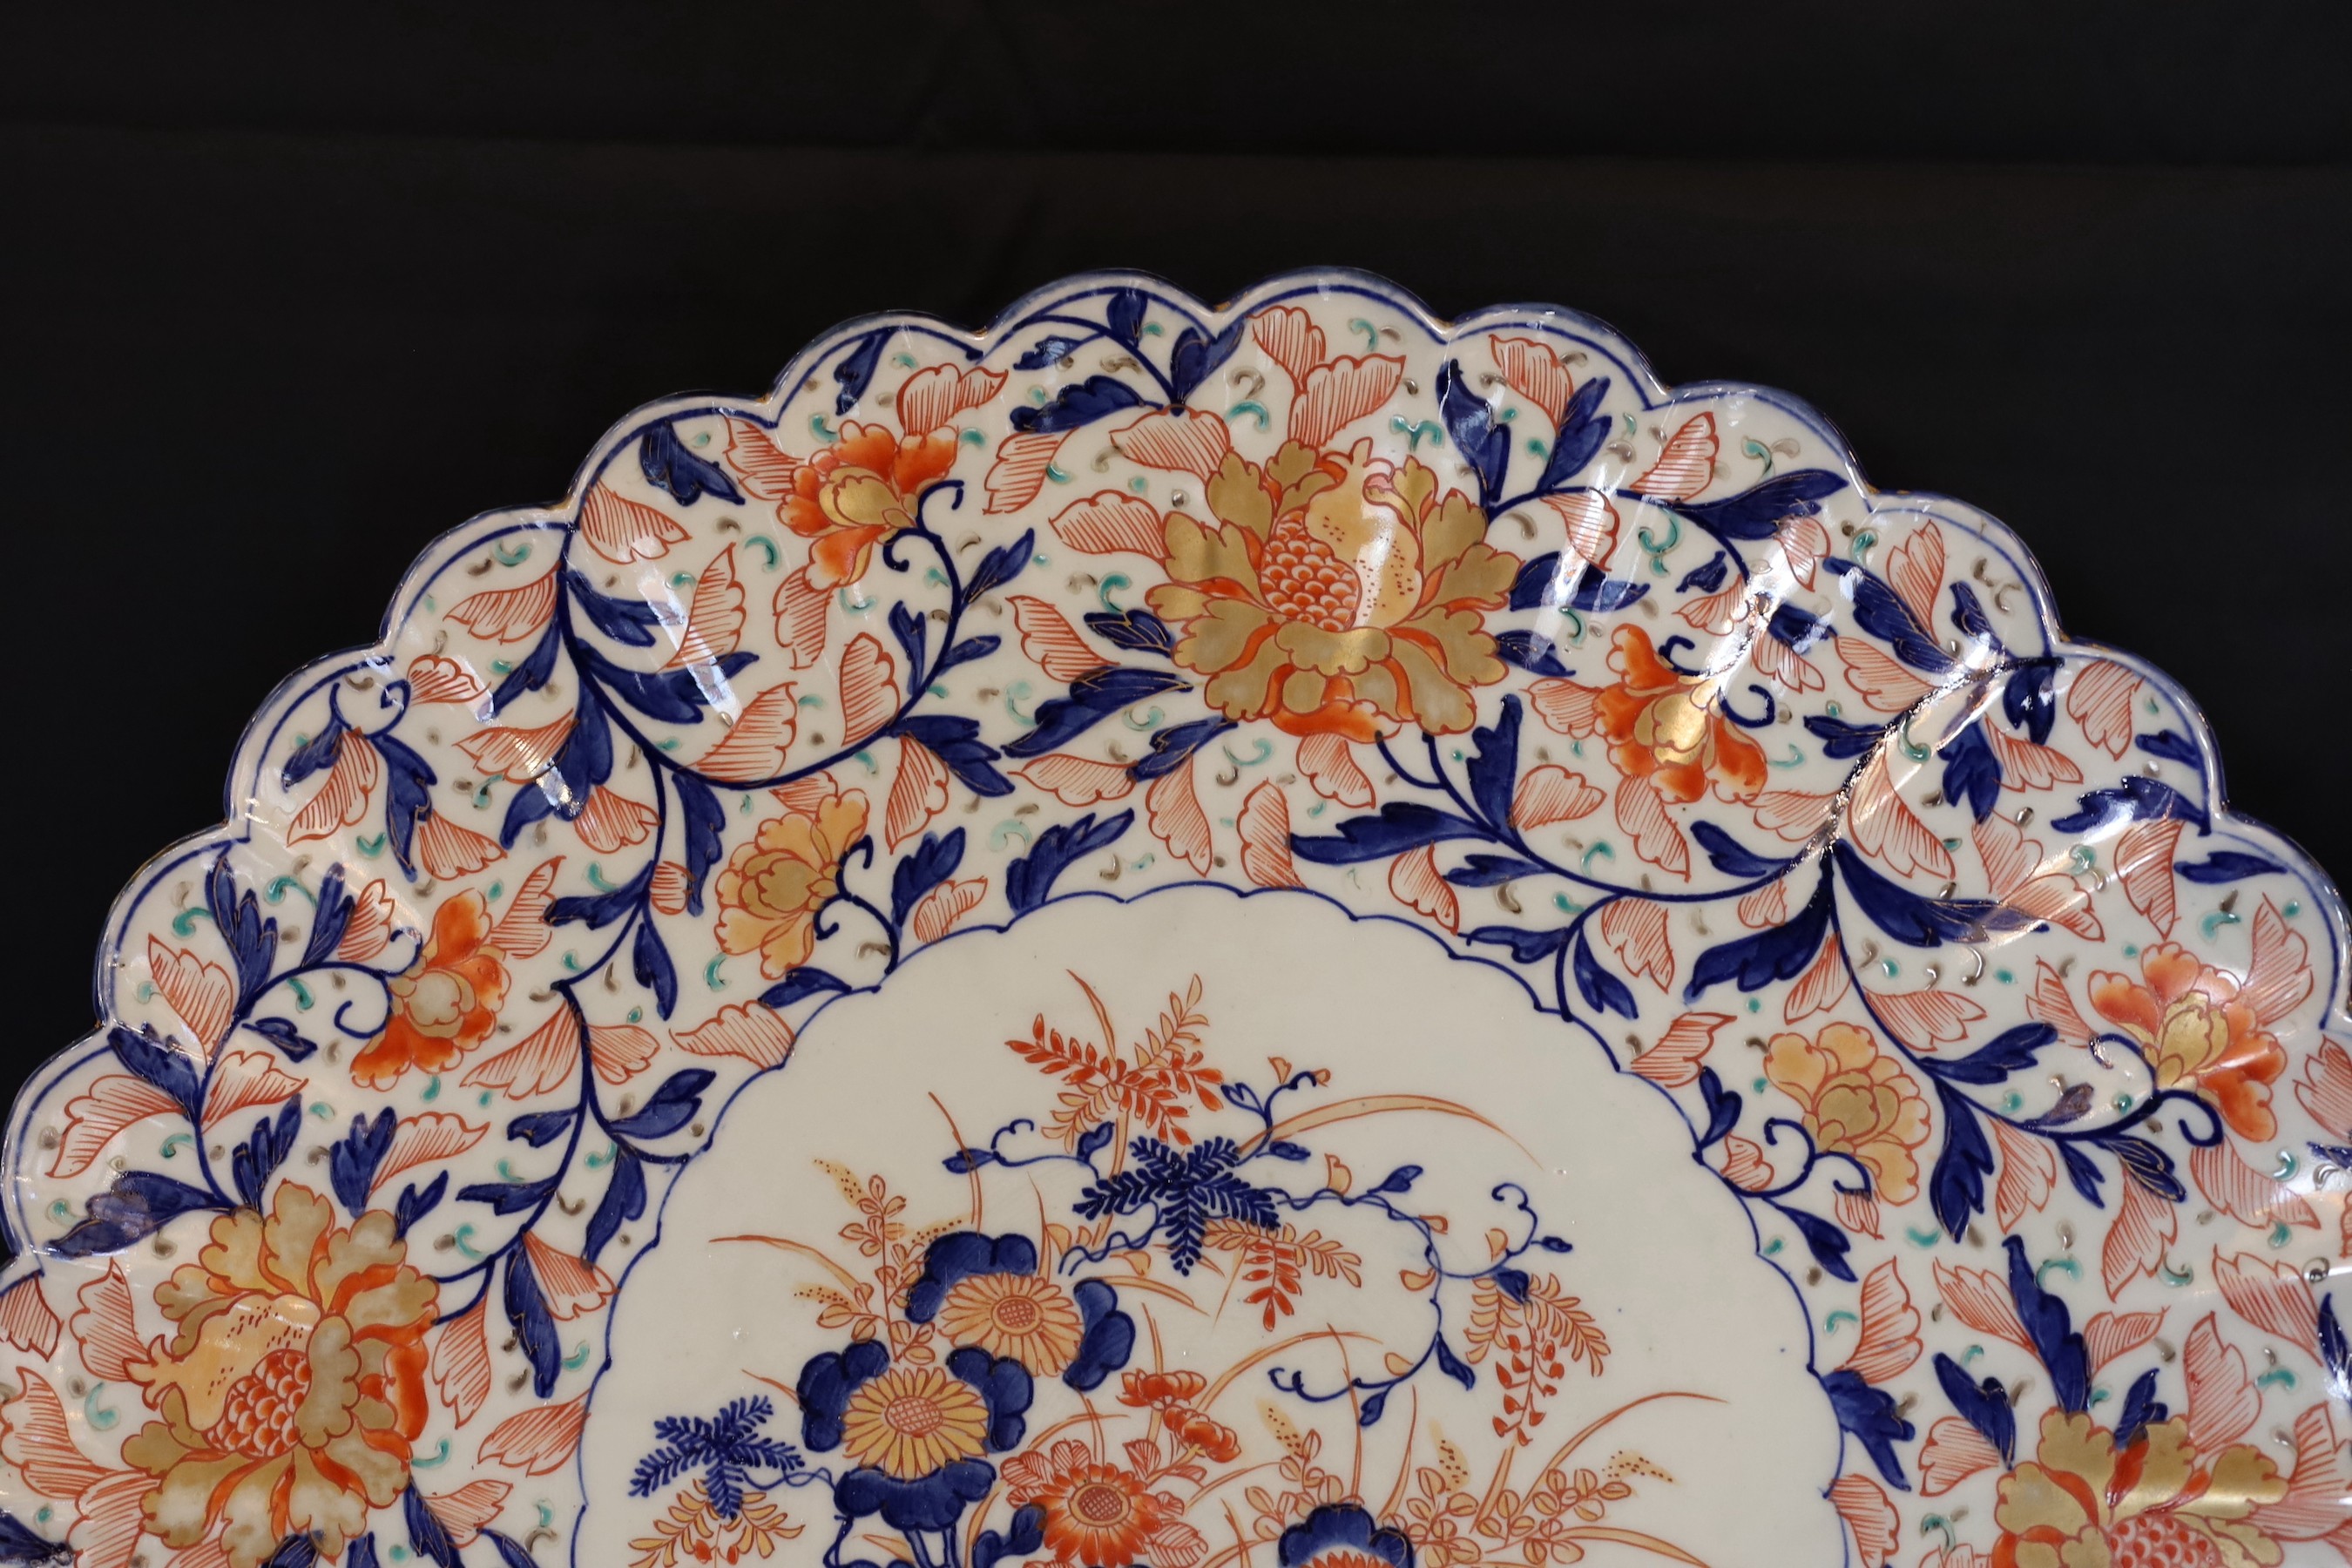 An Imari charger decorated with a central panel of flowers in a vase within floral borders, diameter 47 cm